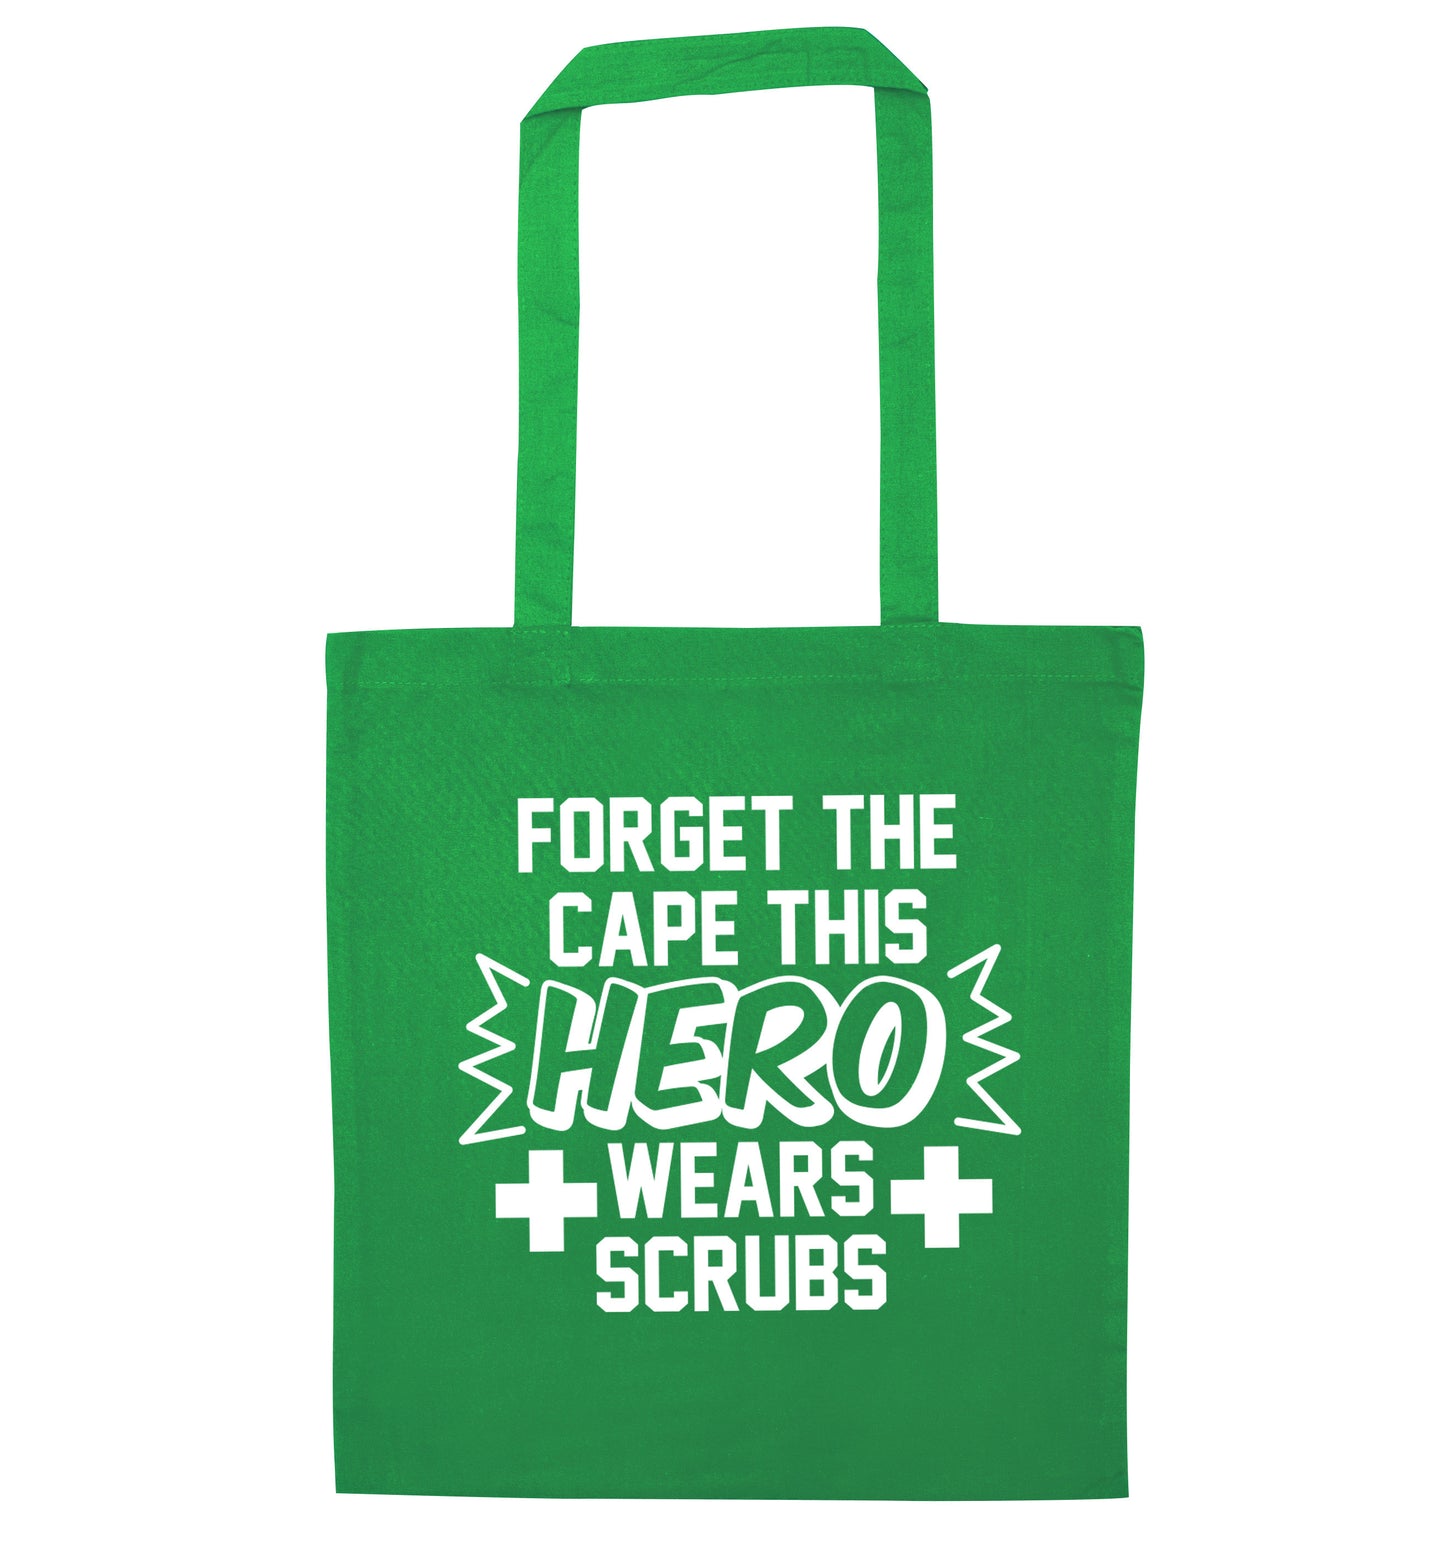 Forget the cape this hero wears scrubs green tote bag